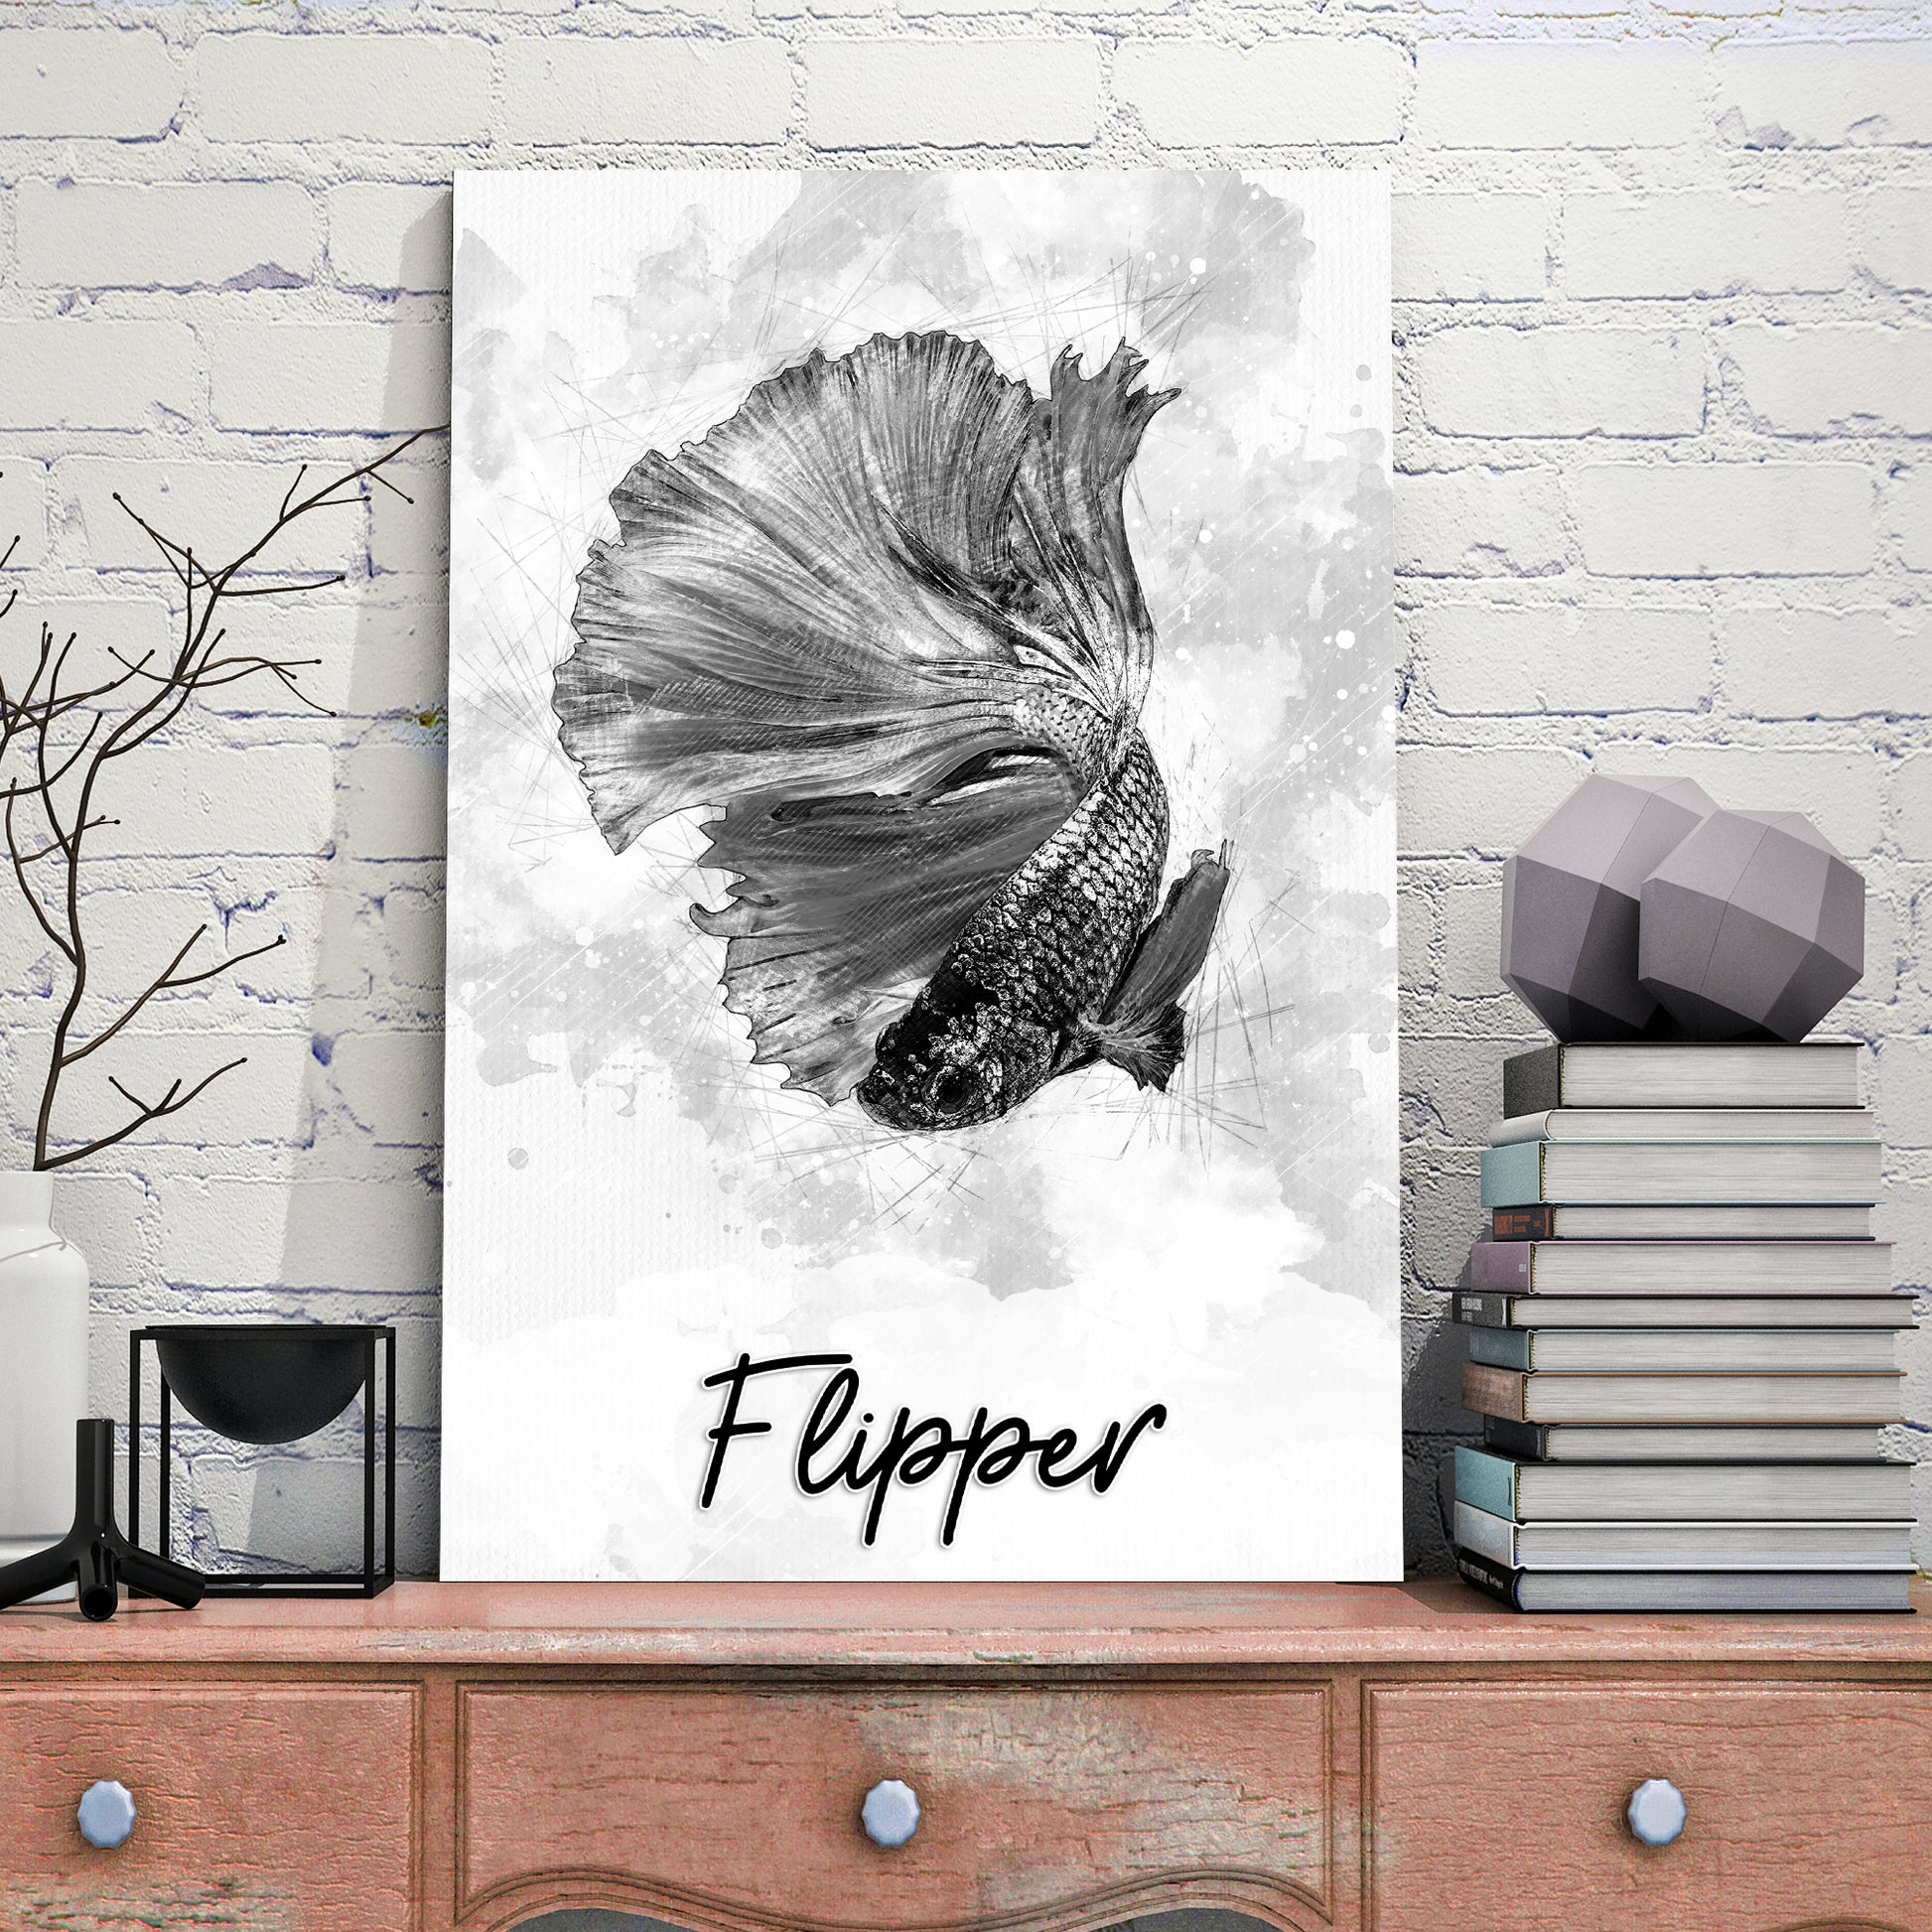 Fish Pencil Sketch Sign  - Image by Tailored Canvases